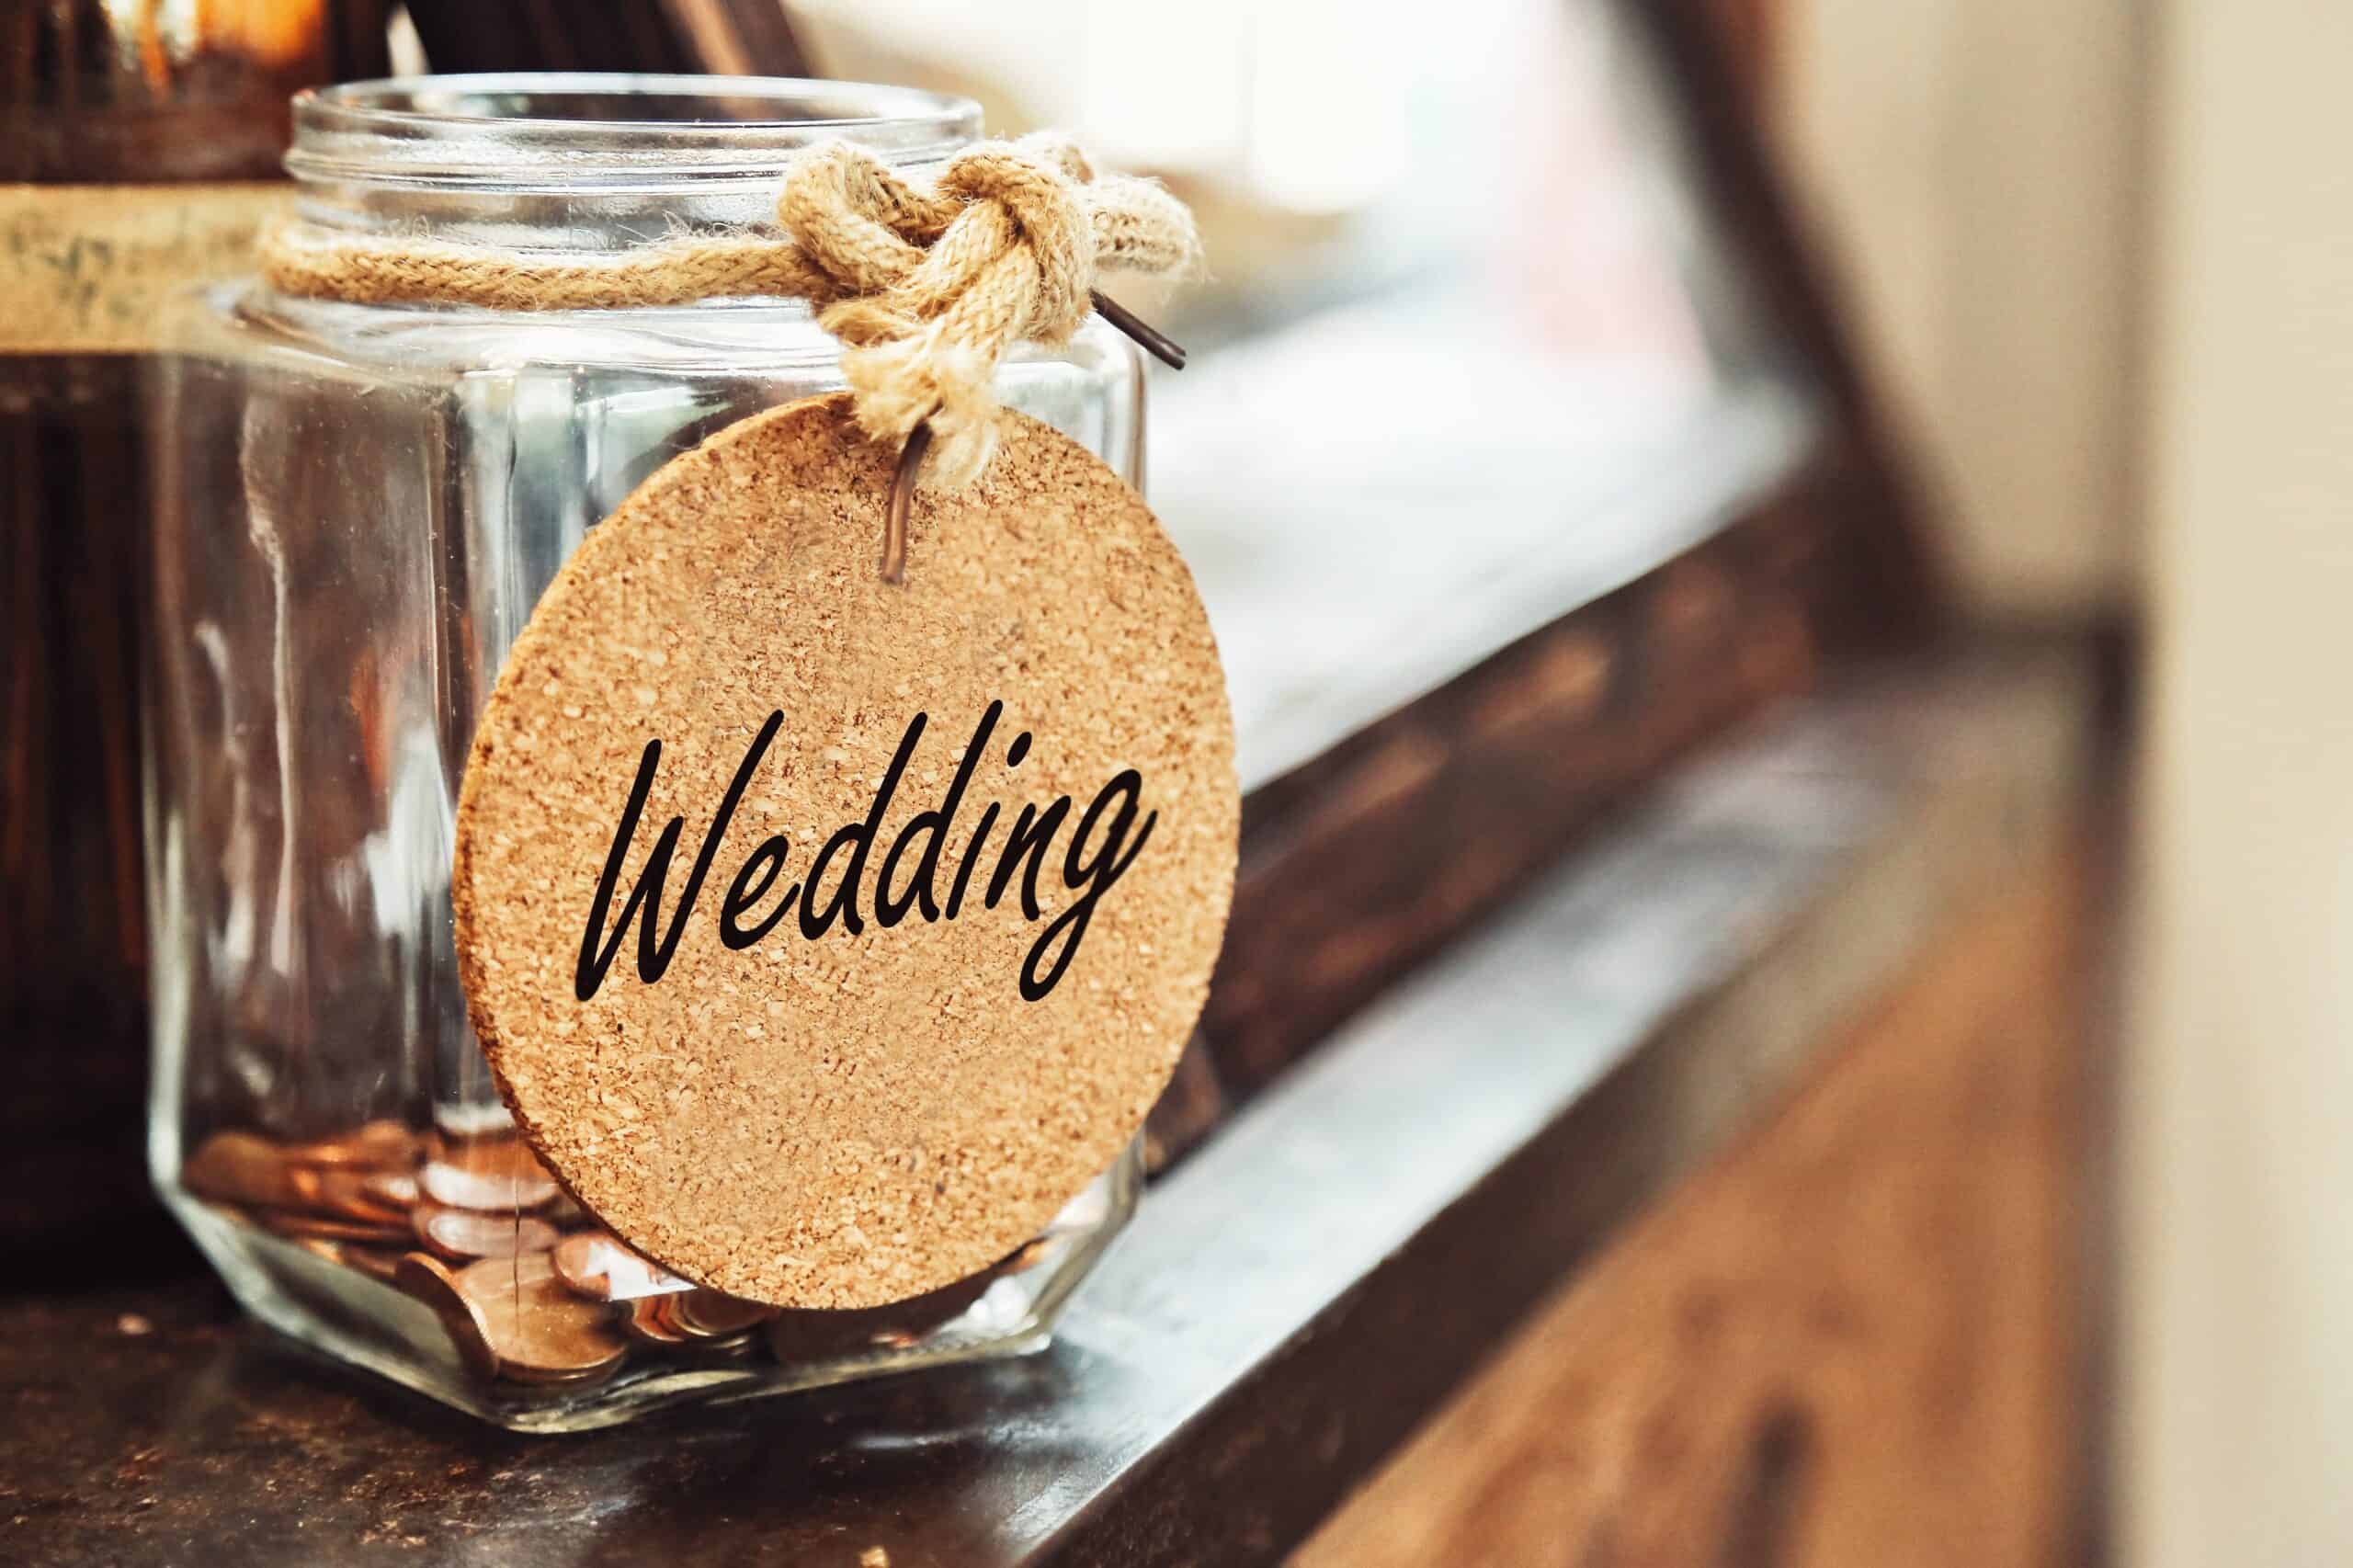 Your wedding budget contingency?